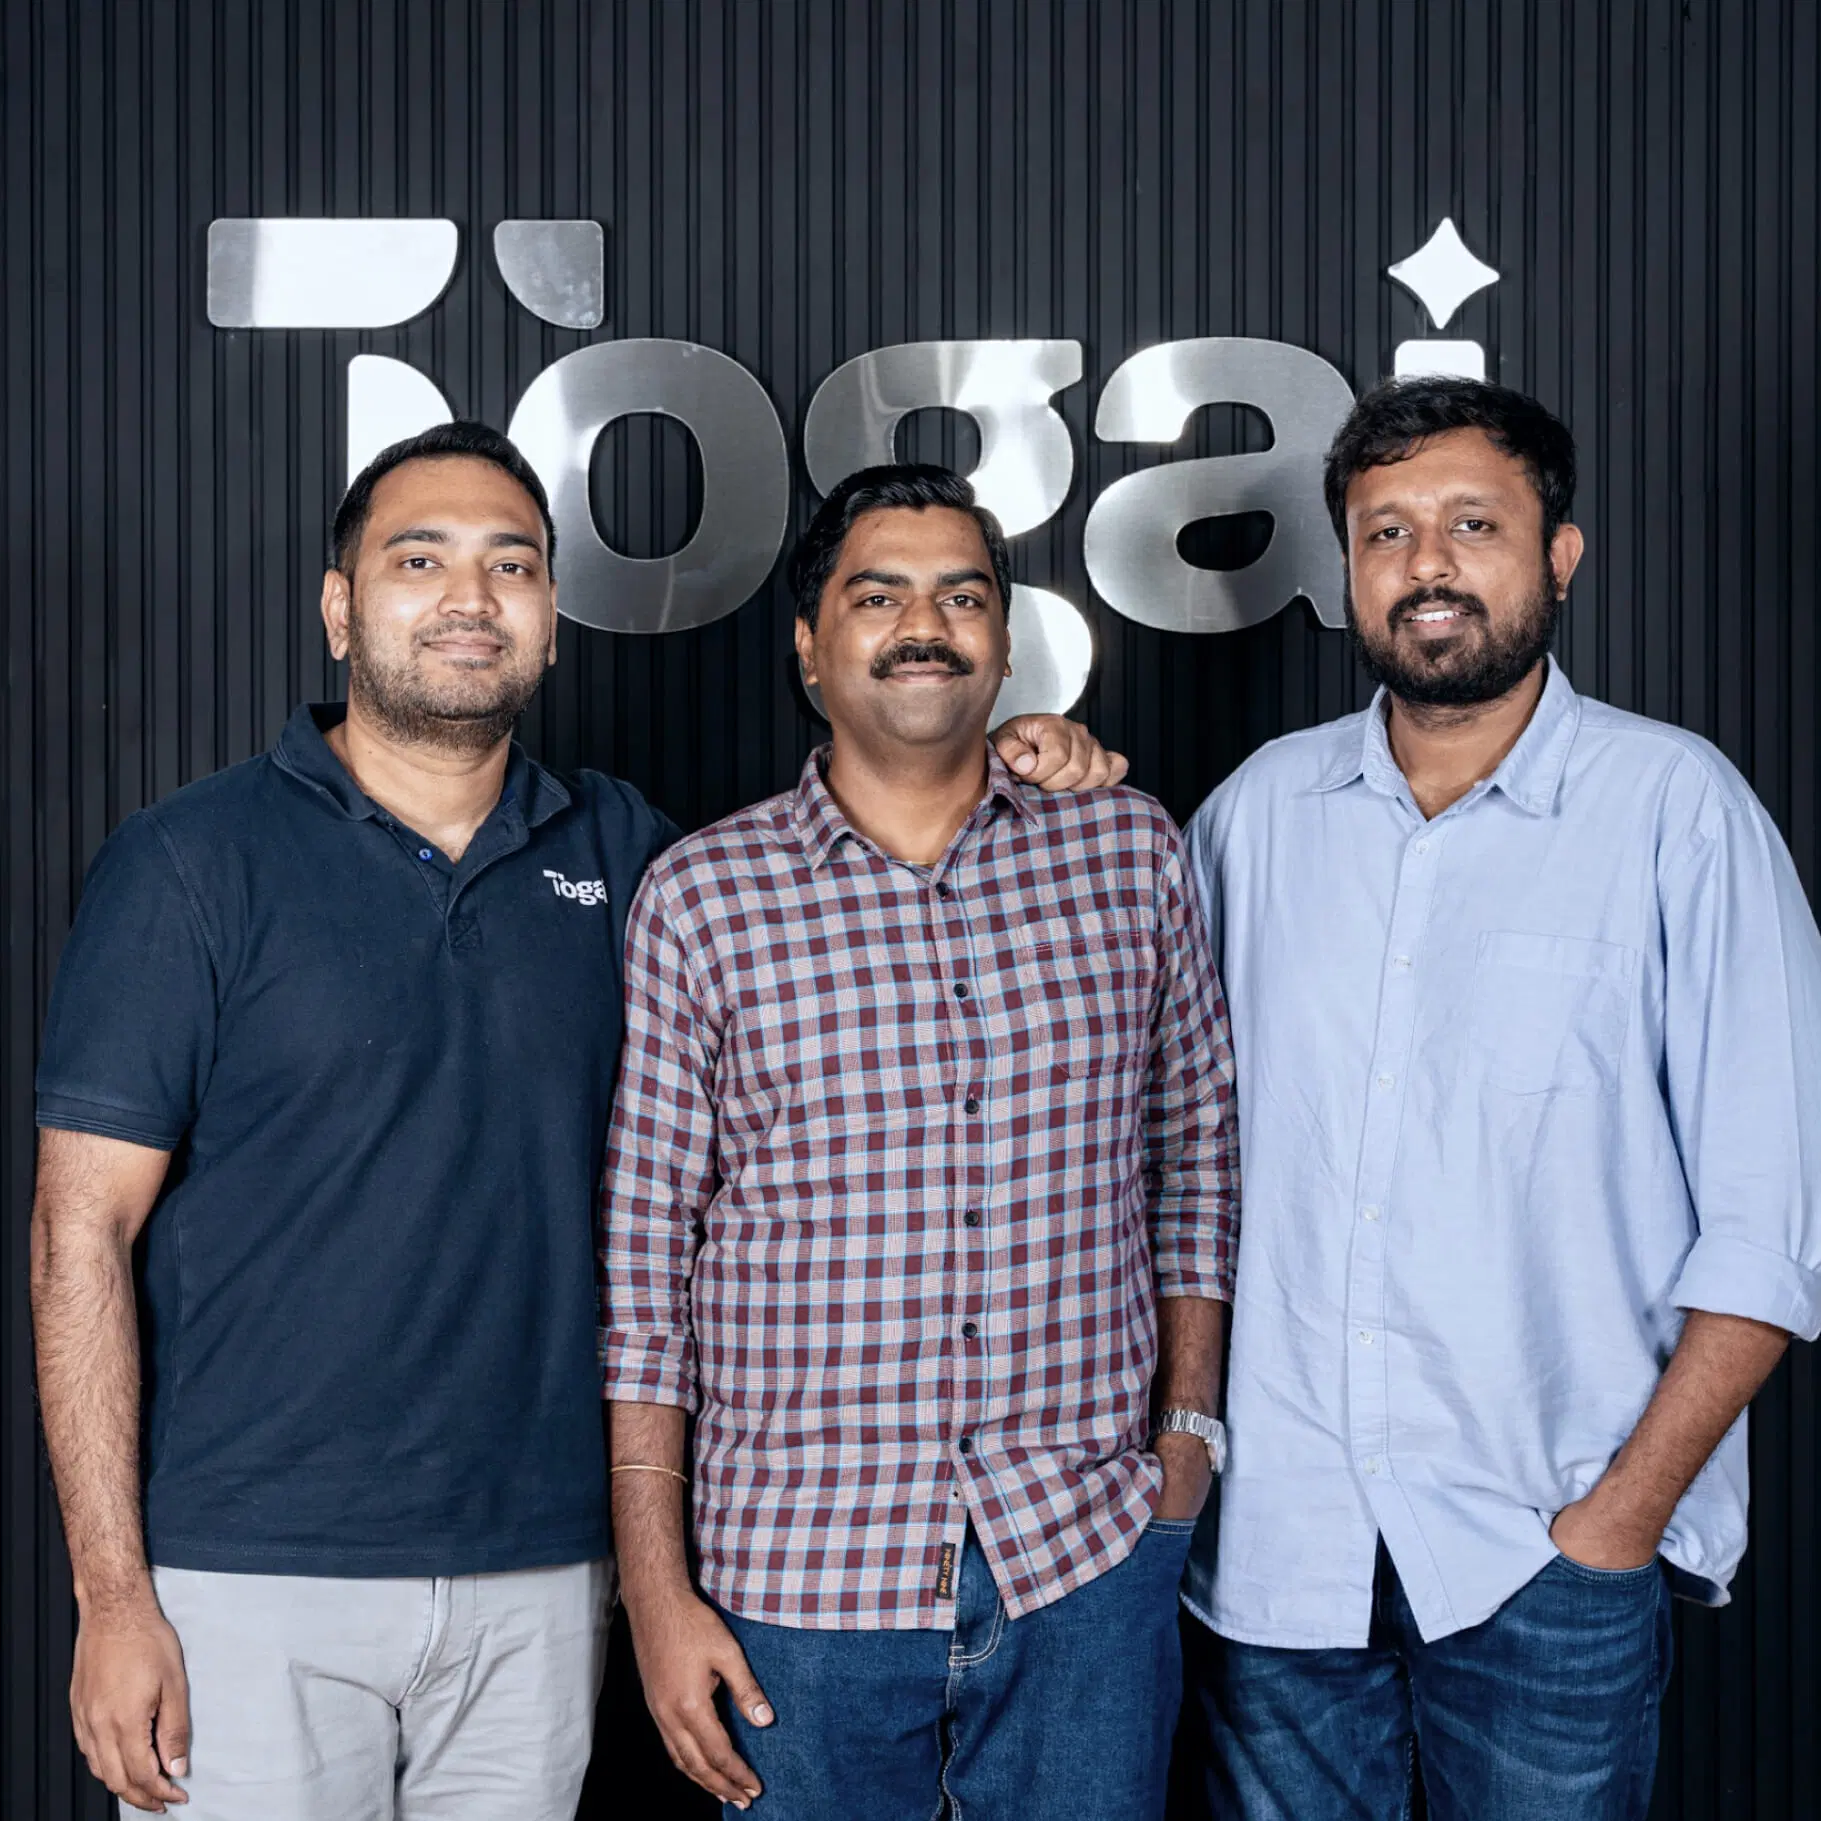 A few members of the Togai team posing for a click.